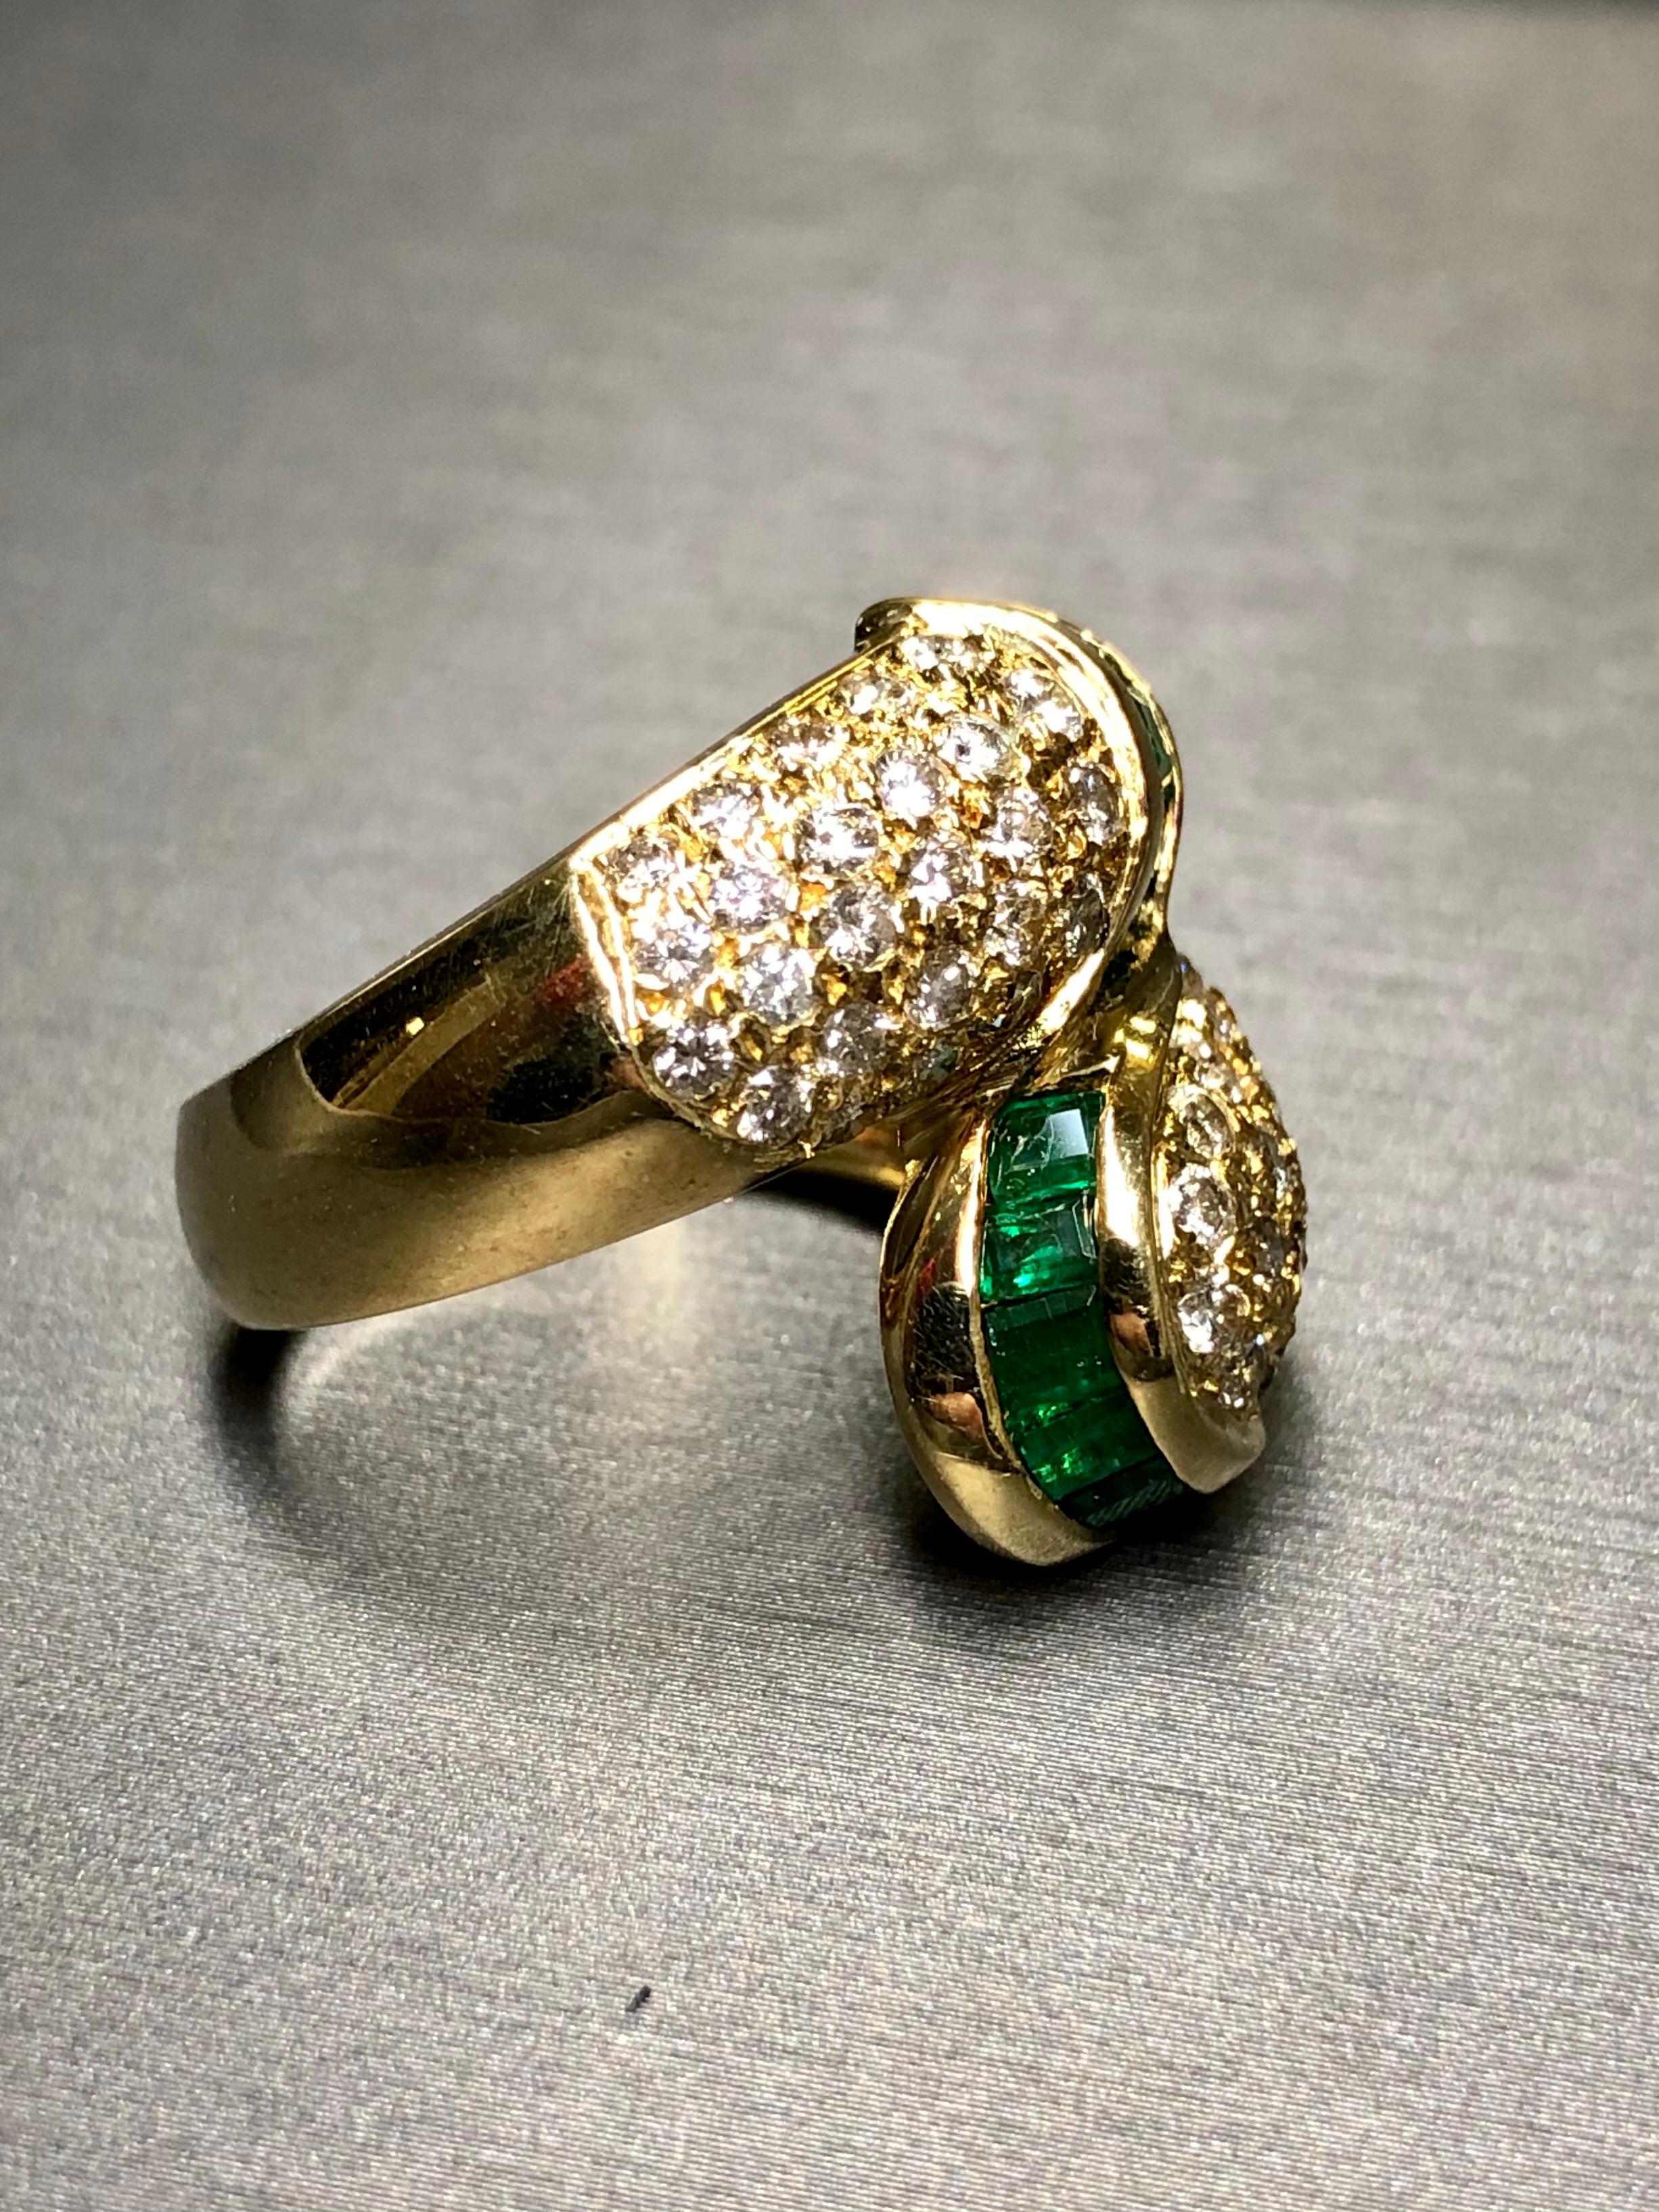 Vintage 18K Emerald Pave Diamond Bypass Large Cocktail Ring 4.30cttw Sz 7.75 For Sale 4